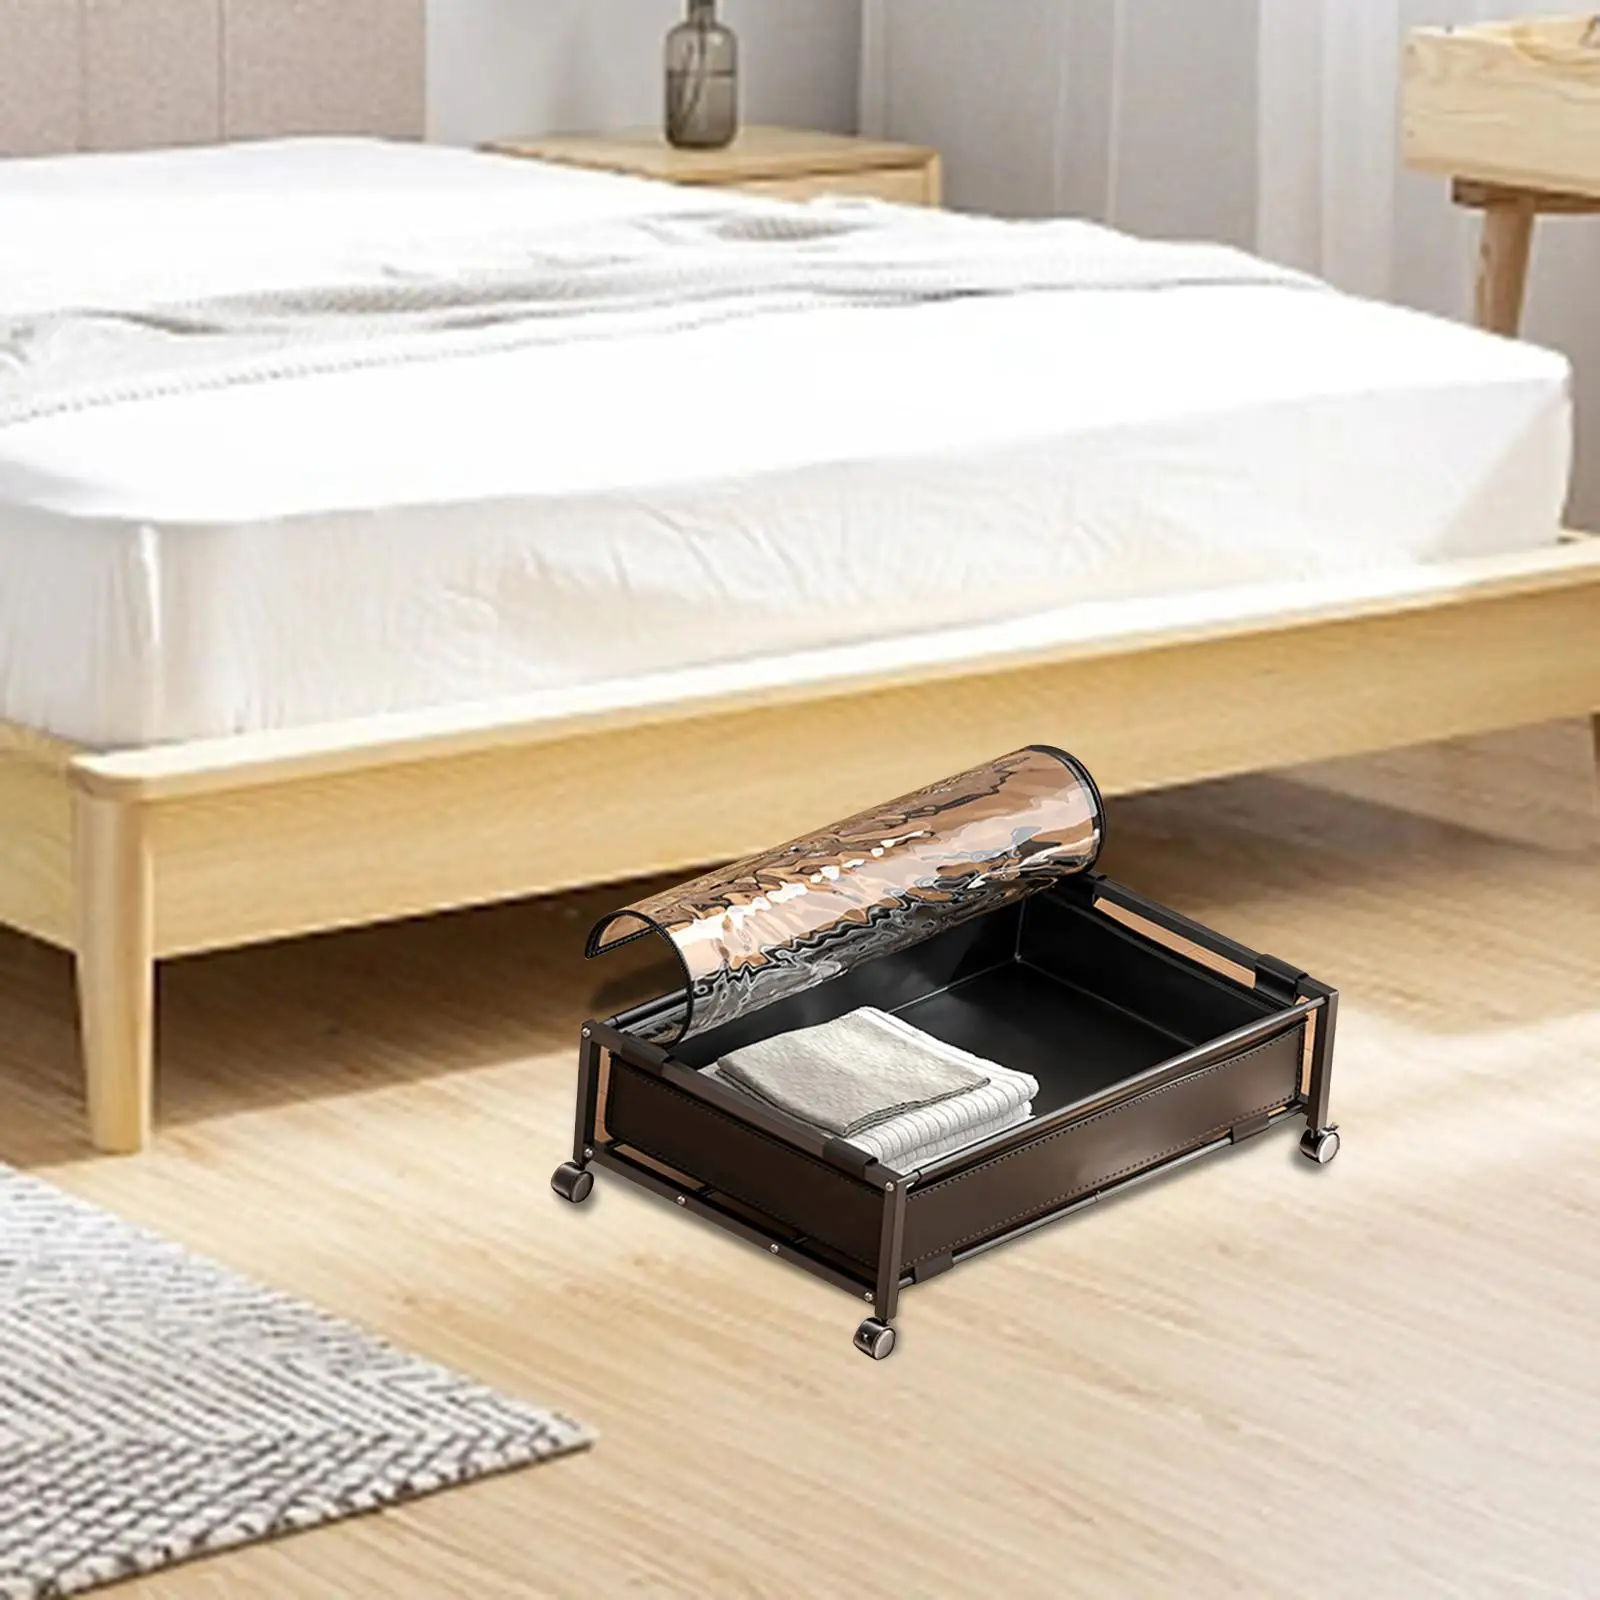 under Bed Storage Multipurpose Narrow Space Saving under Bed Storage with Wheels for Wardrobe Shoes Book Blanket Couches